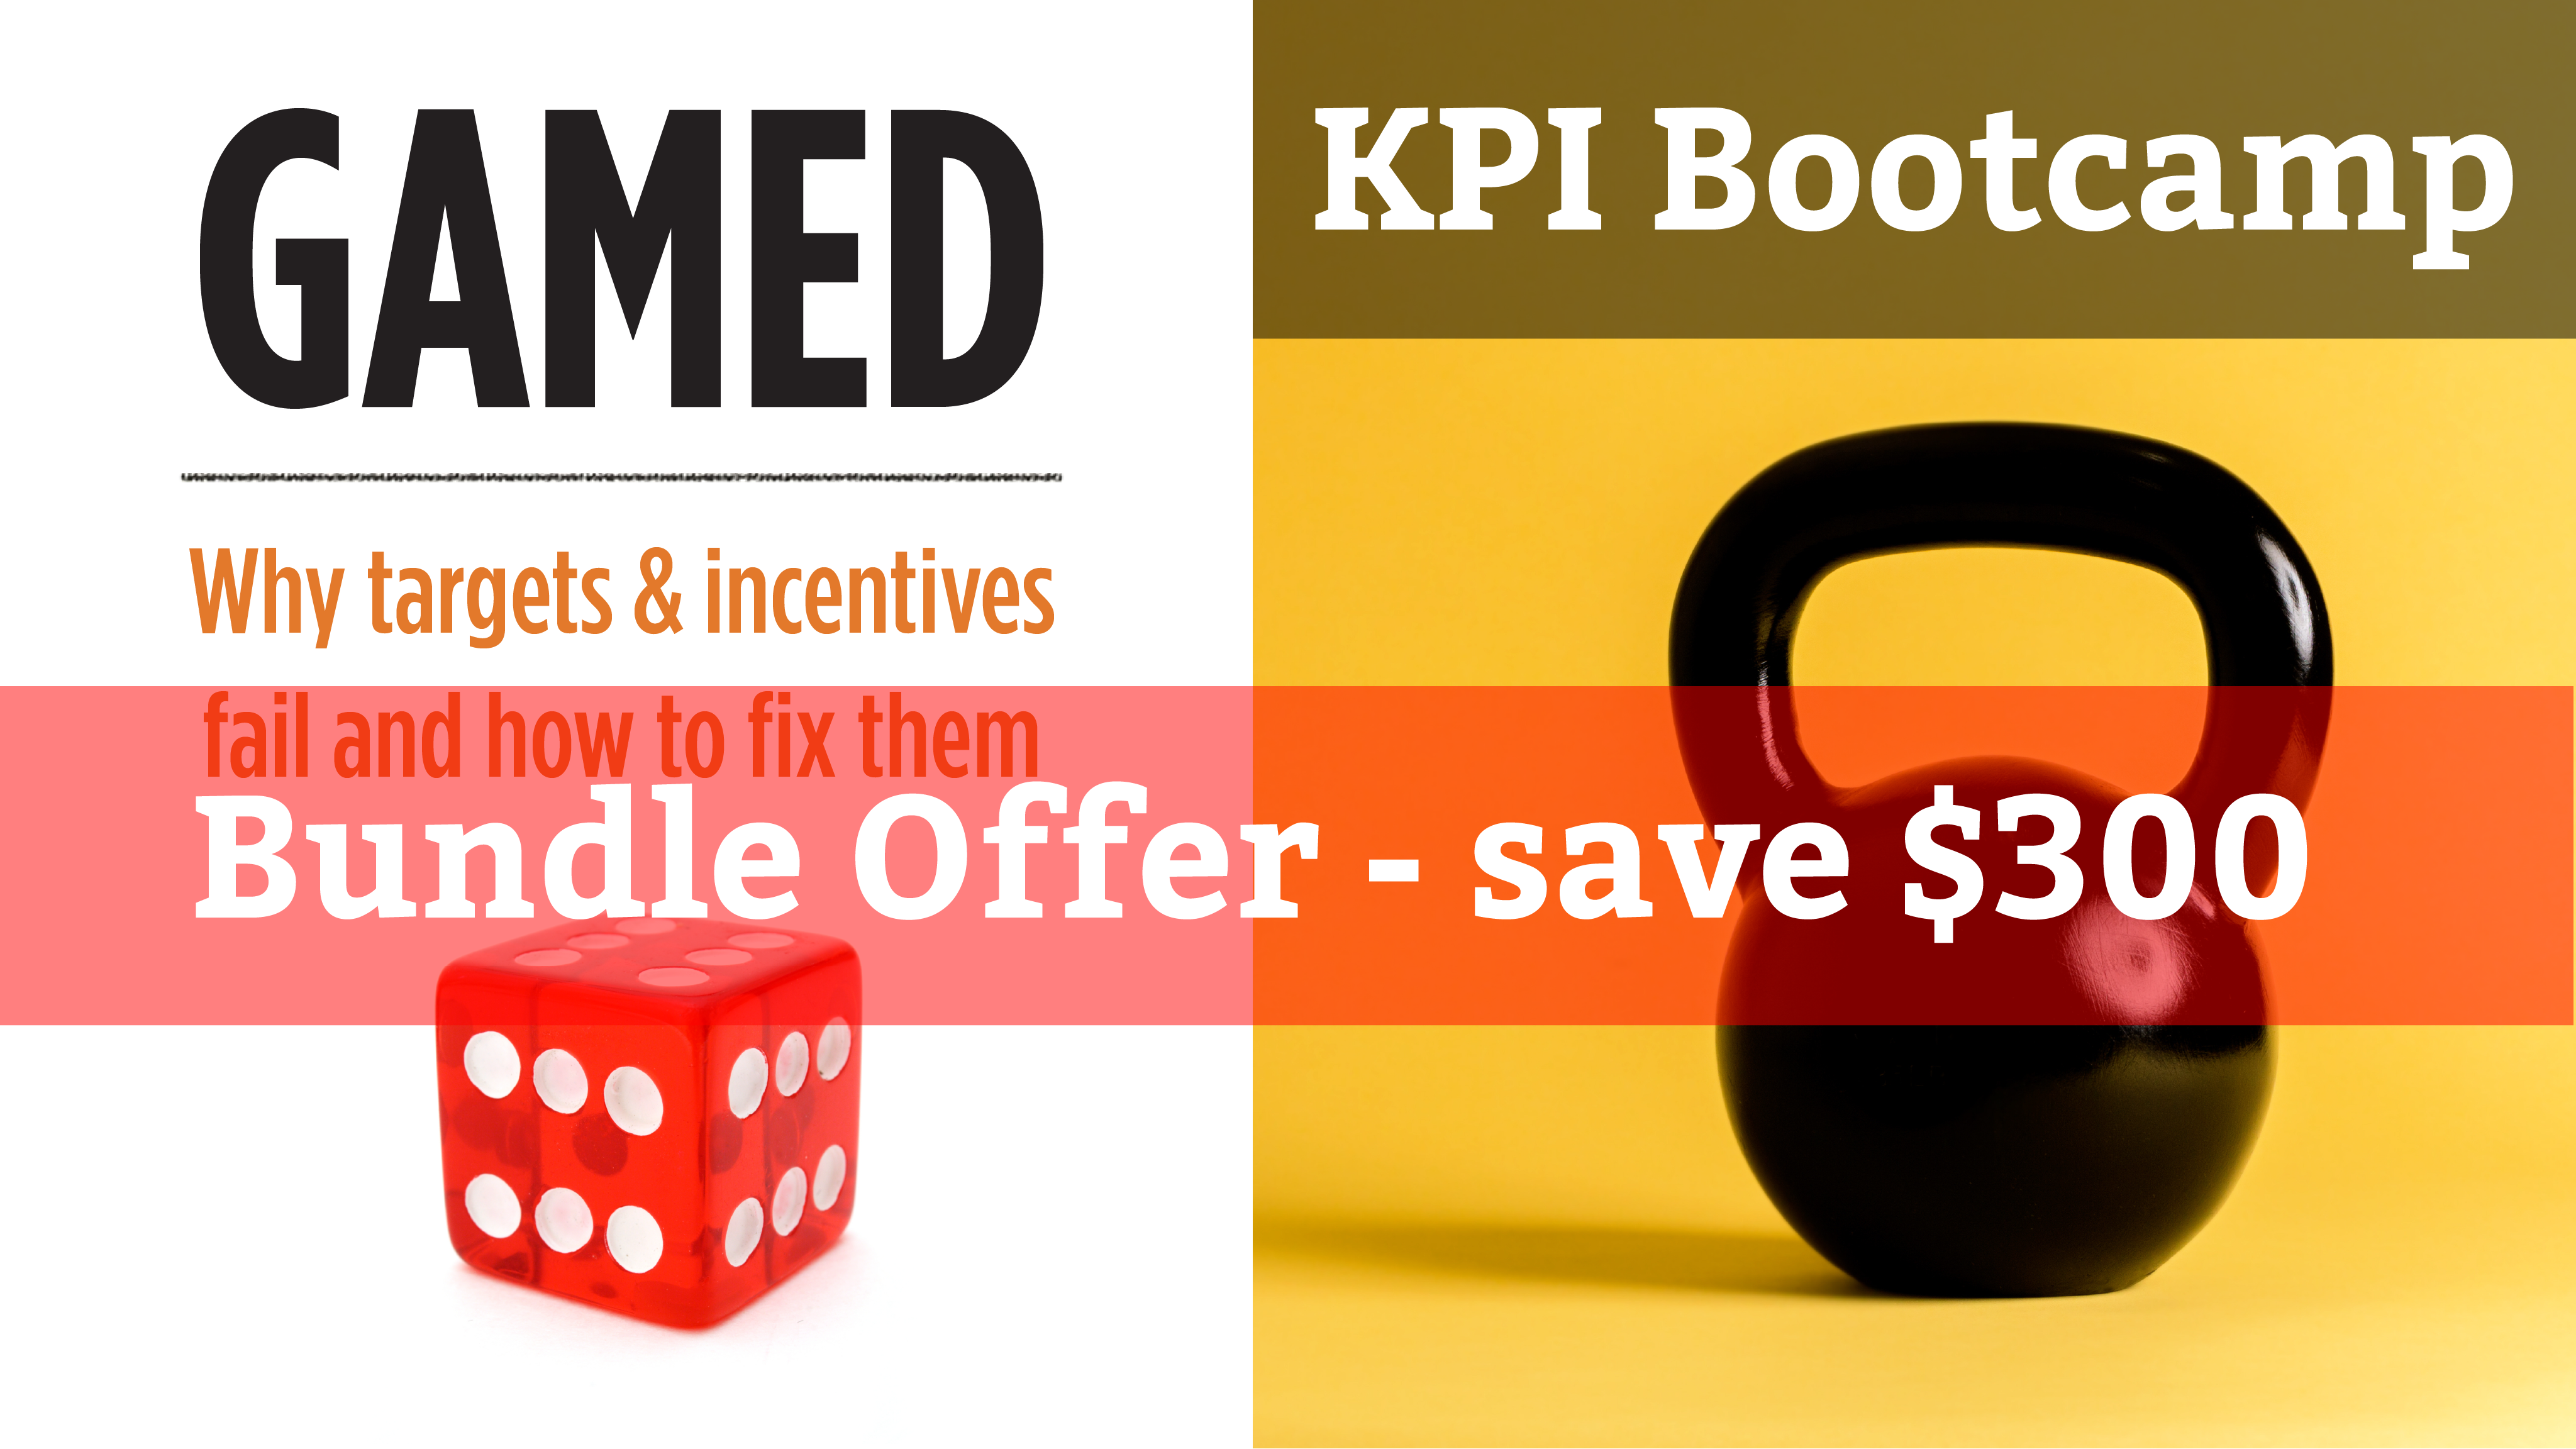 Course images for GAMED course and KPI Bootcamp course